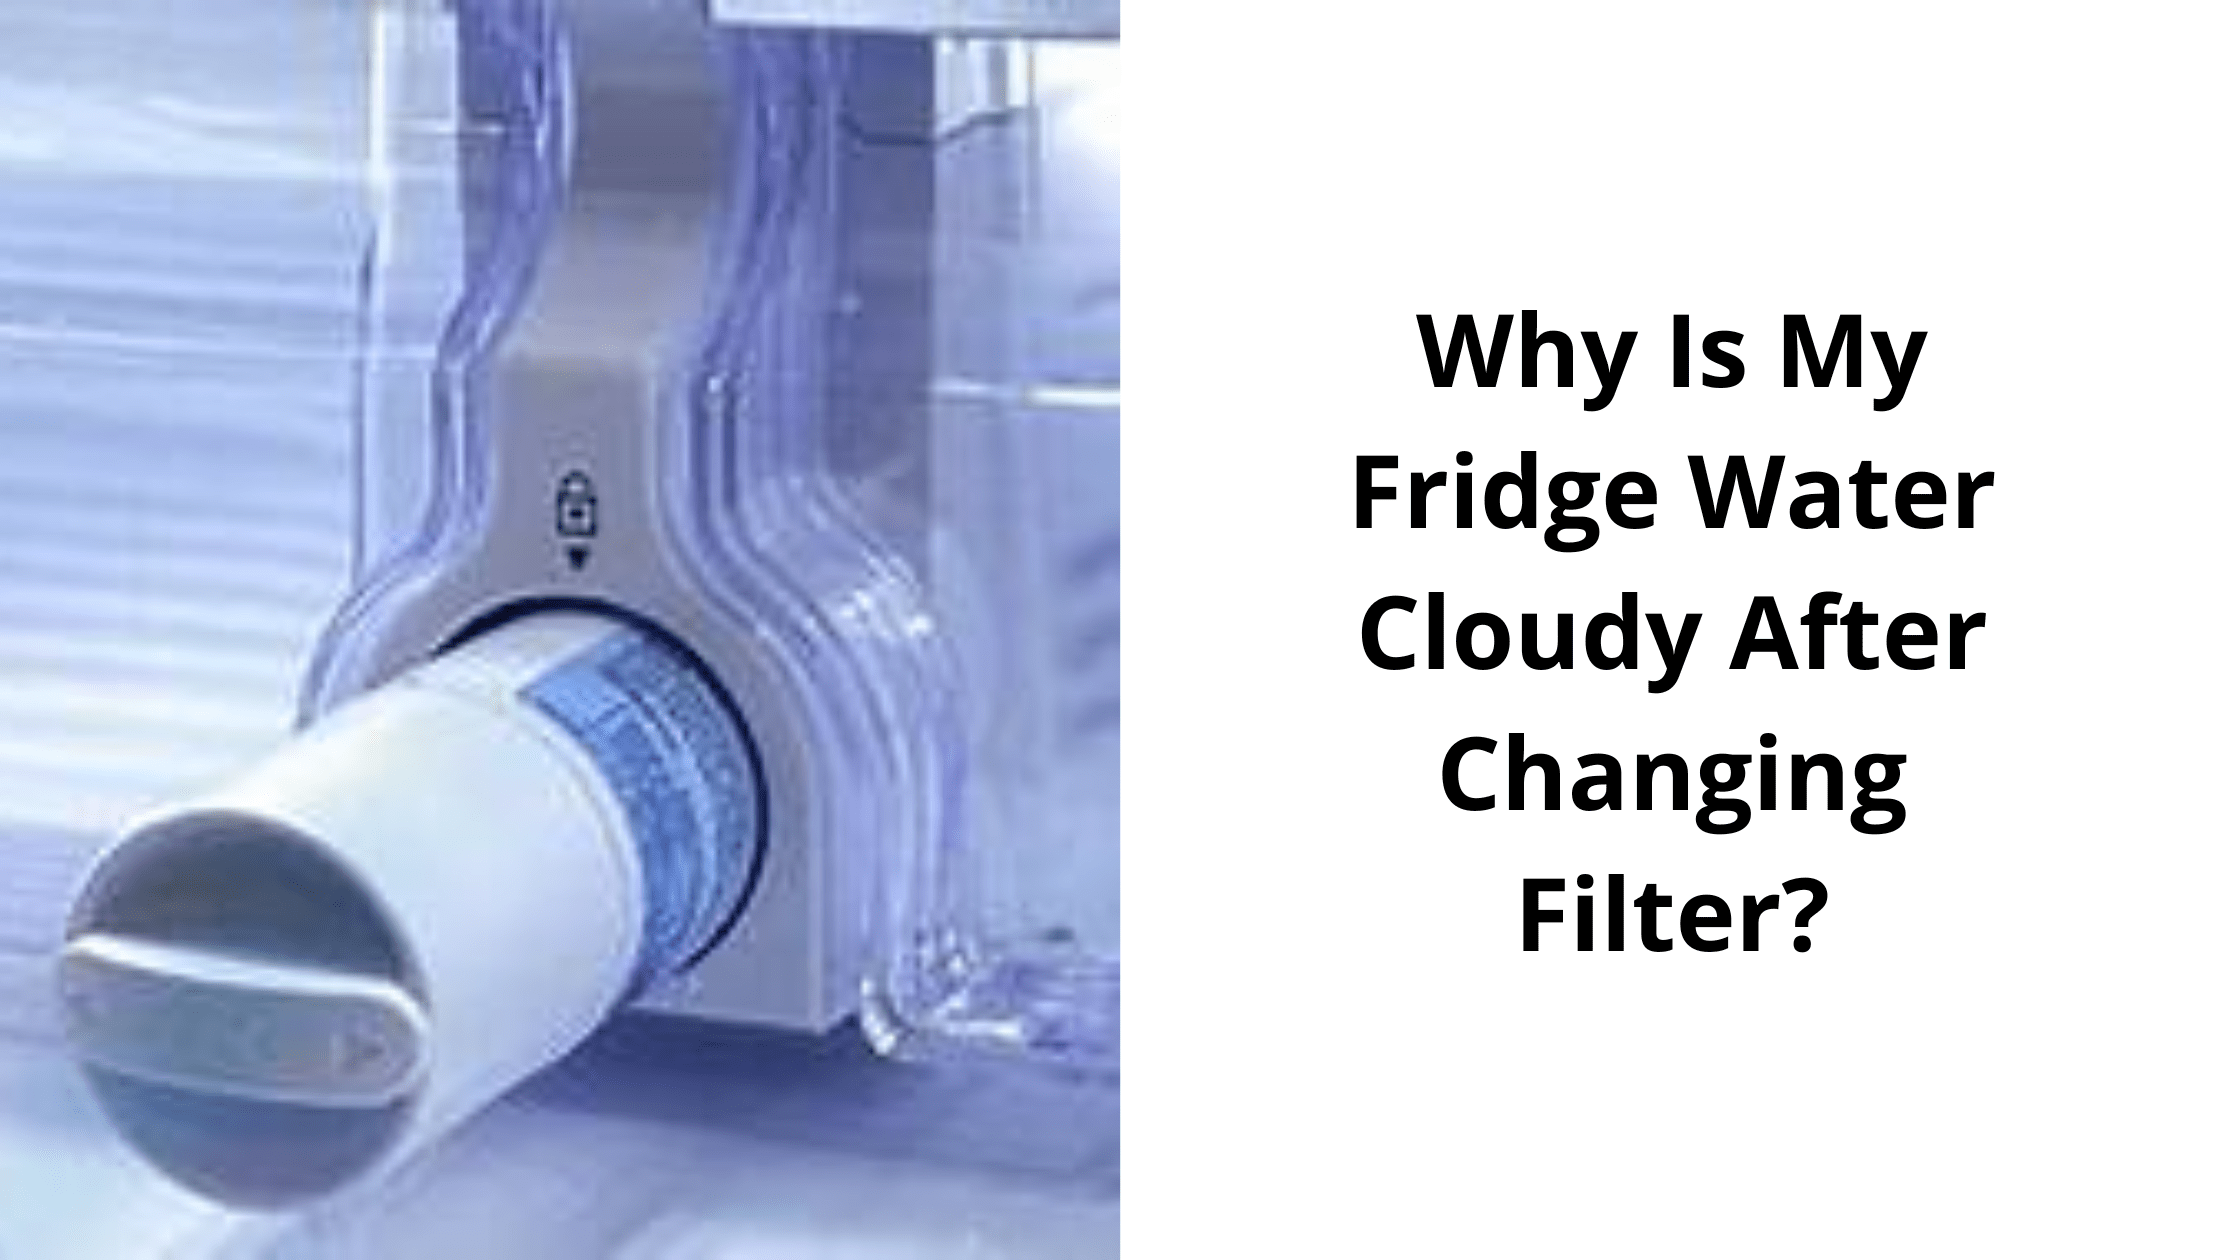 Why Is My Fridge Water Cloudy After Changing Filter?